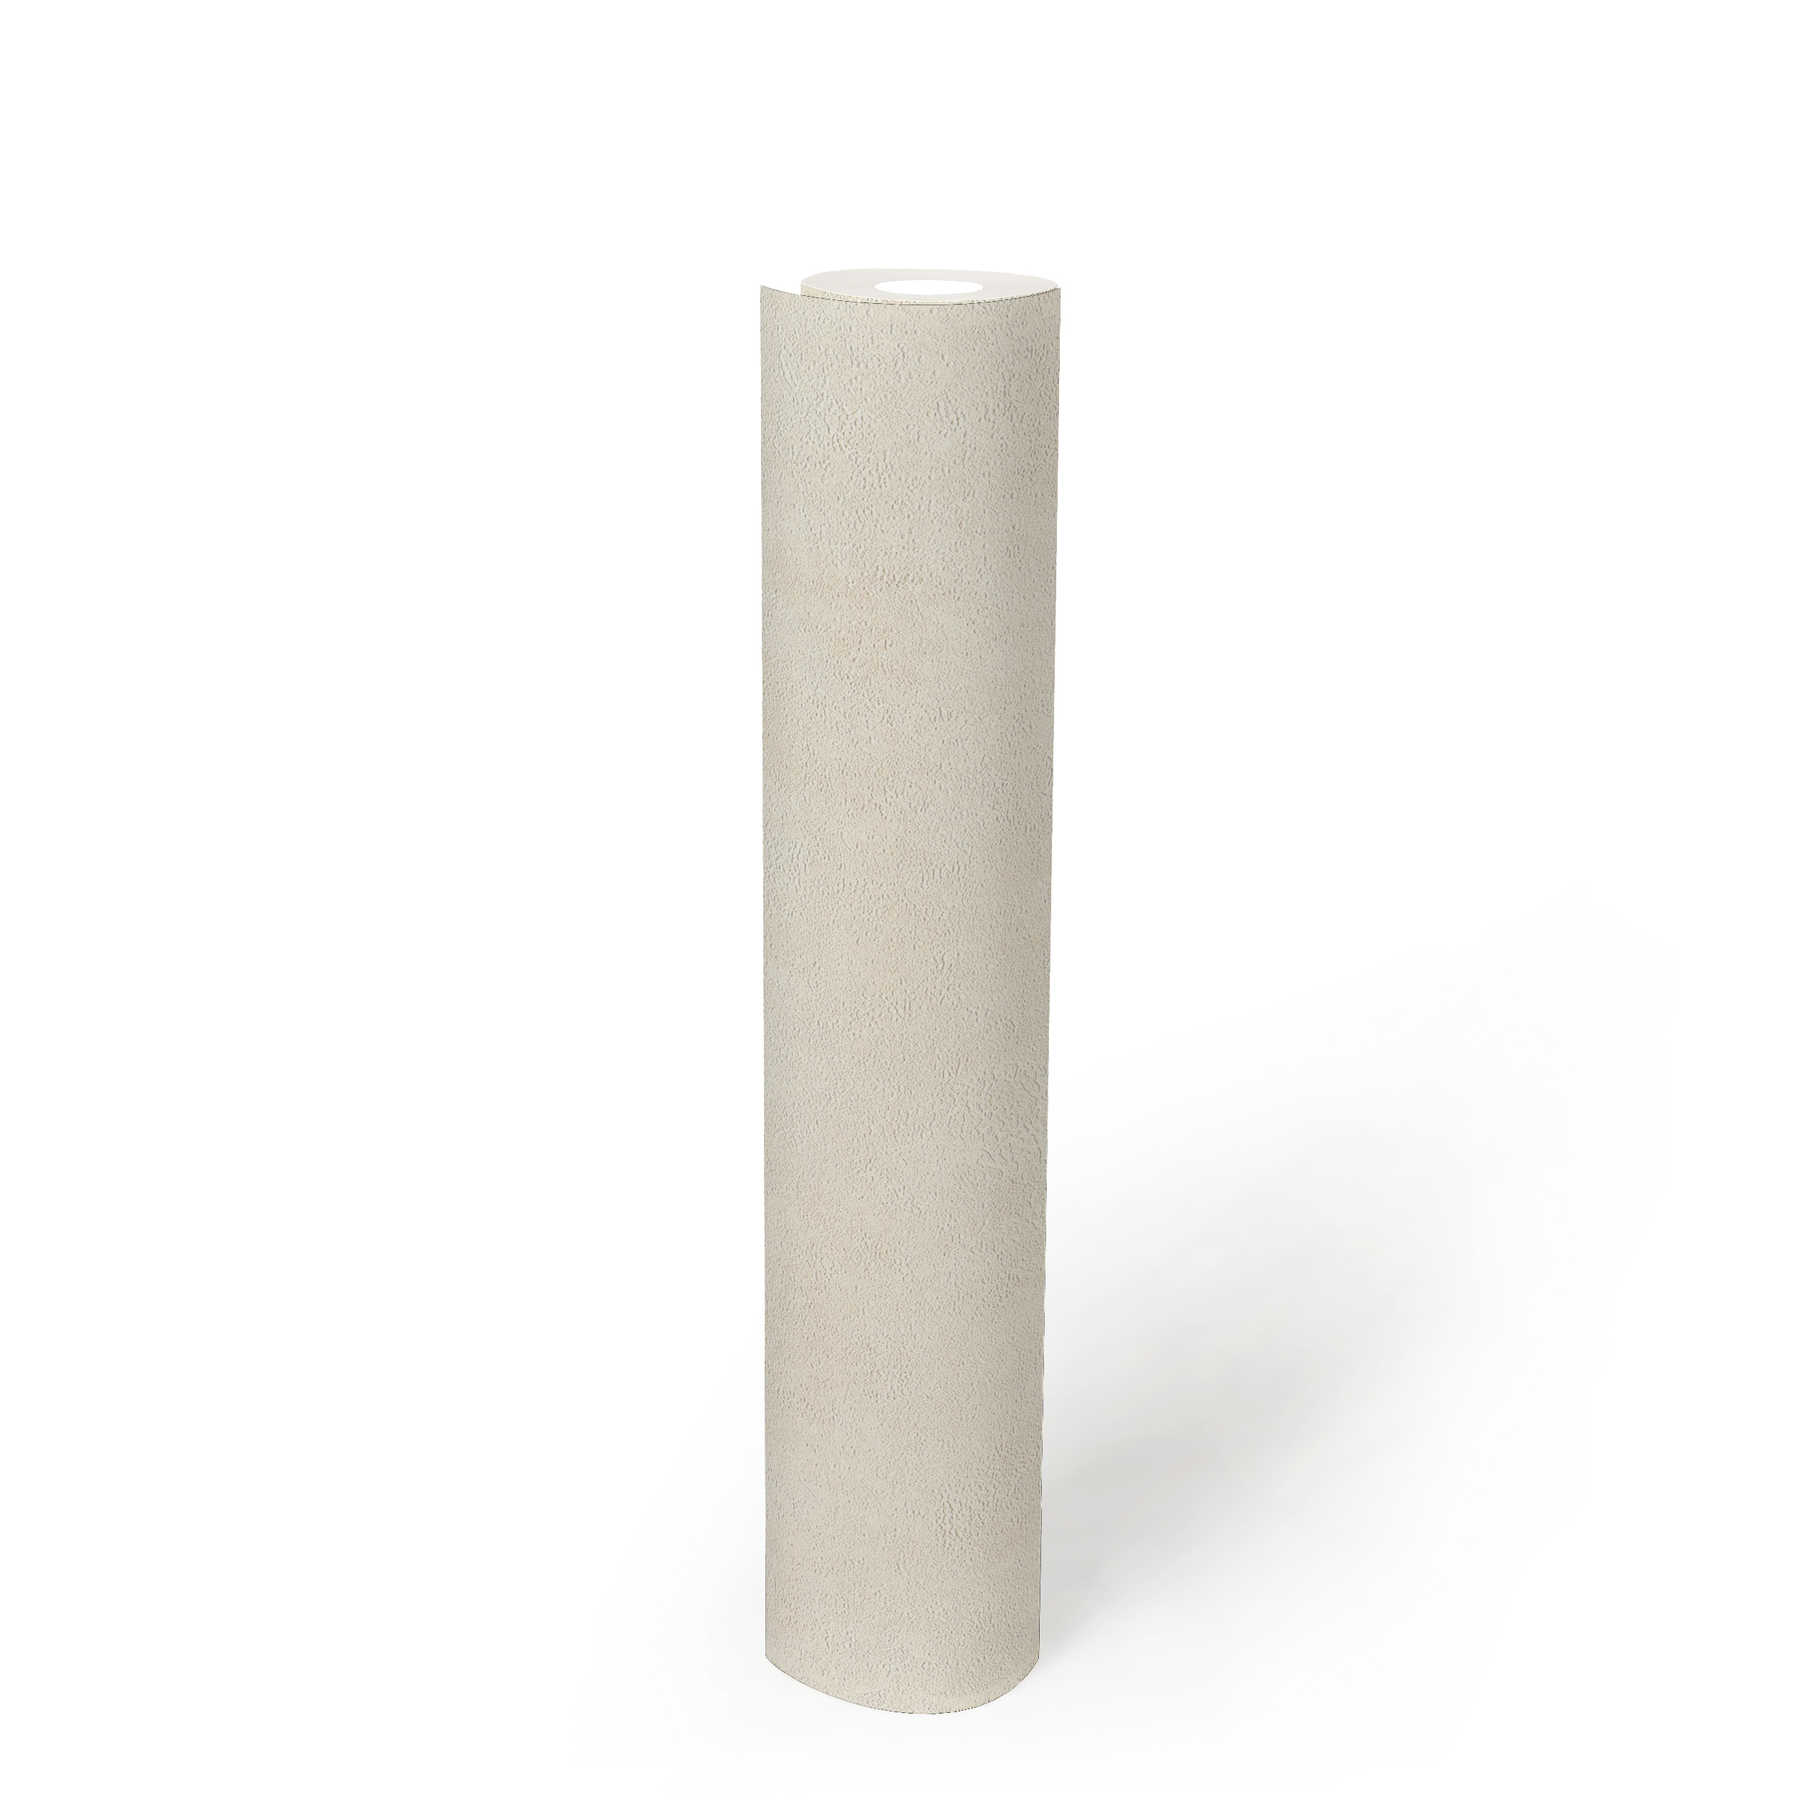             Non-woven wallpaper with light shimmer accents - cream, white
        